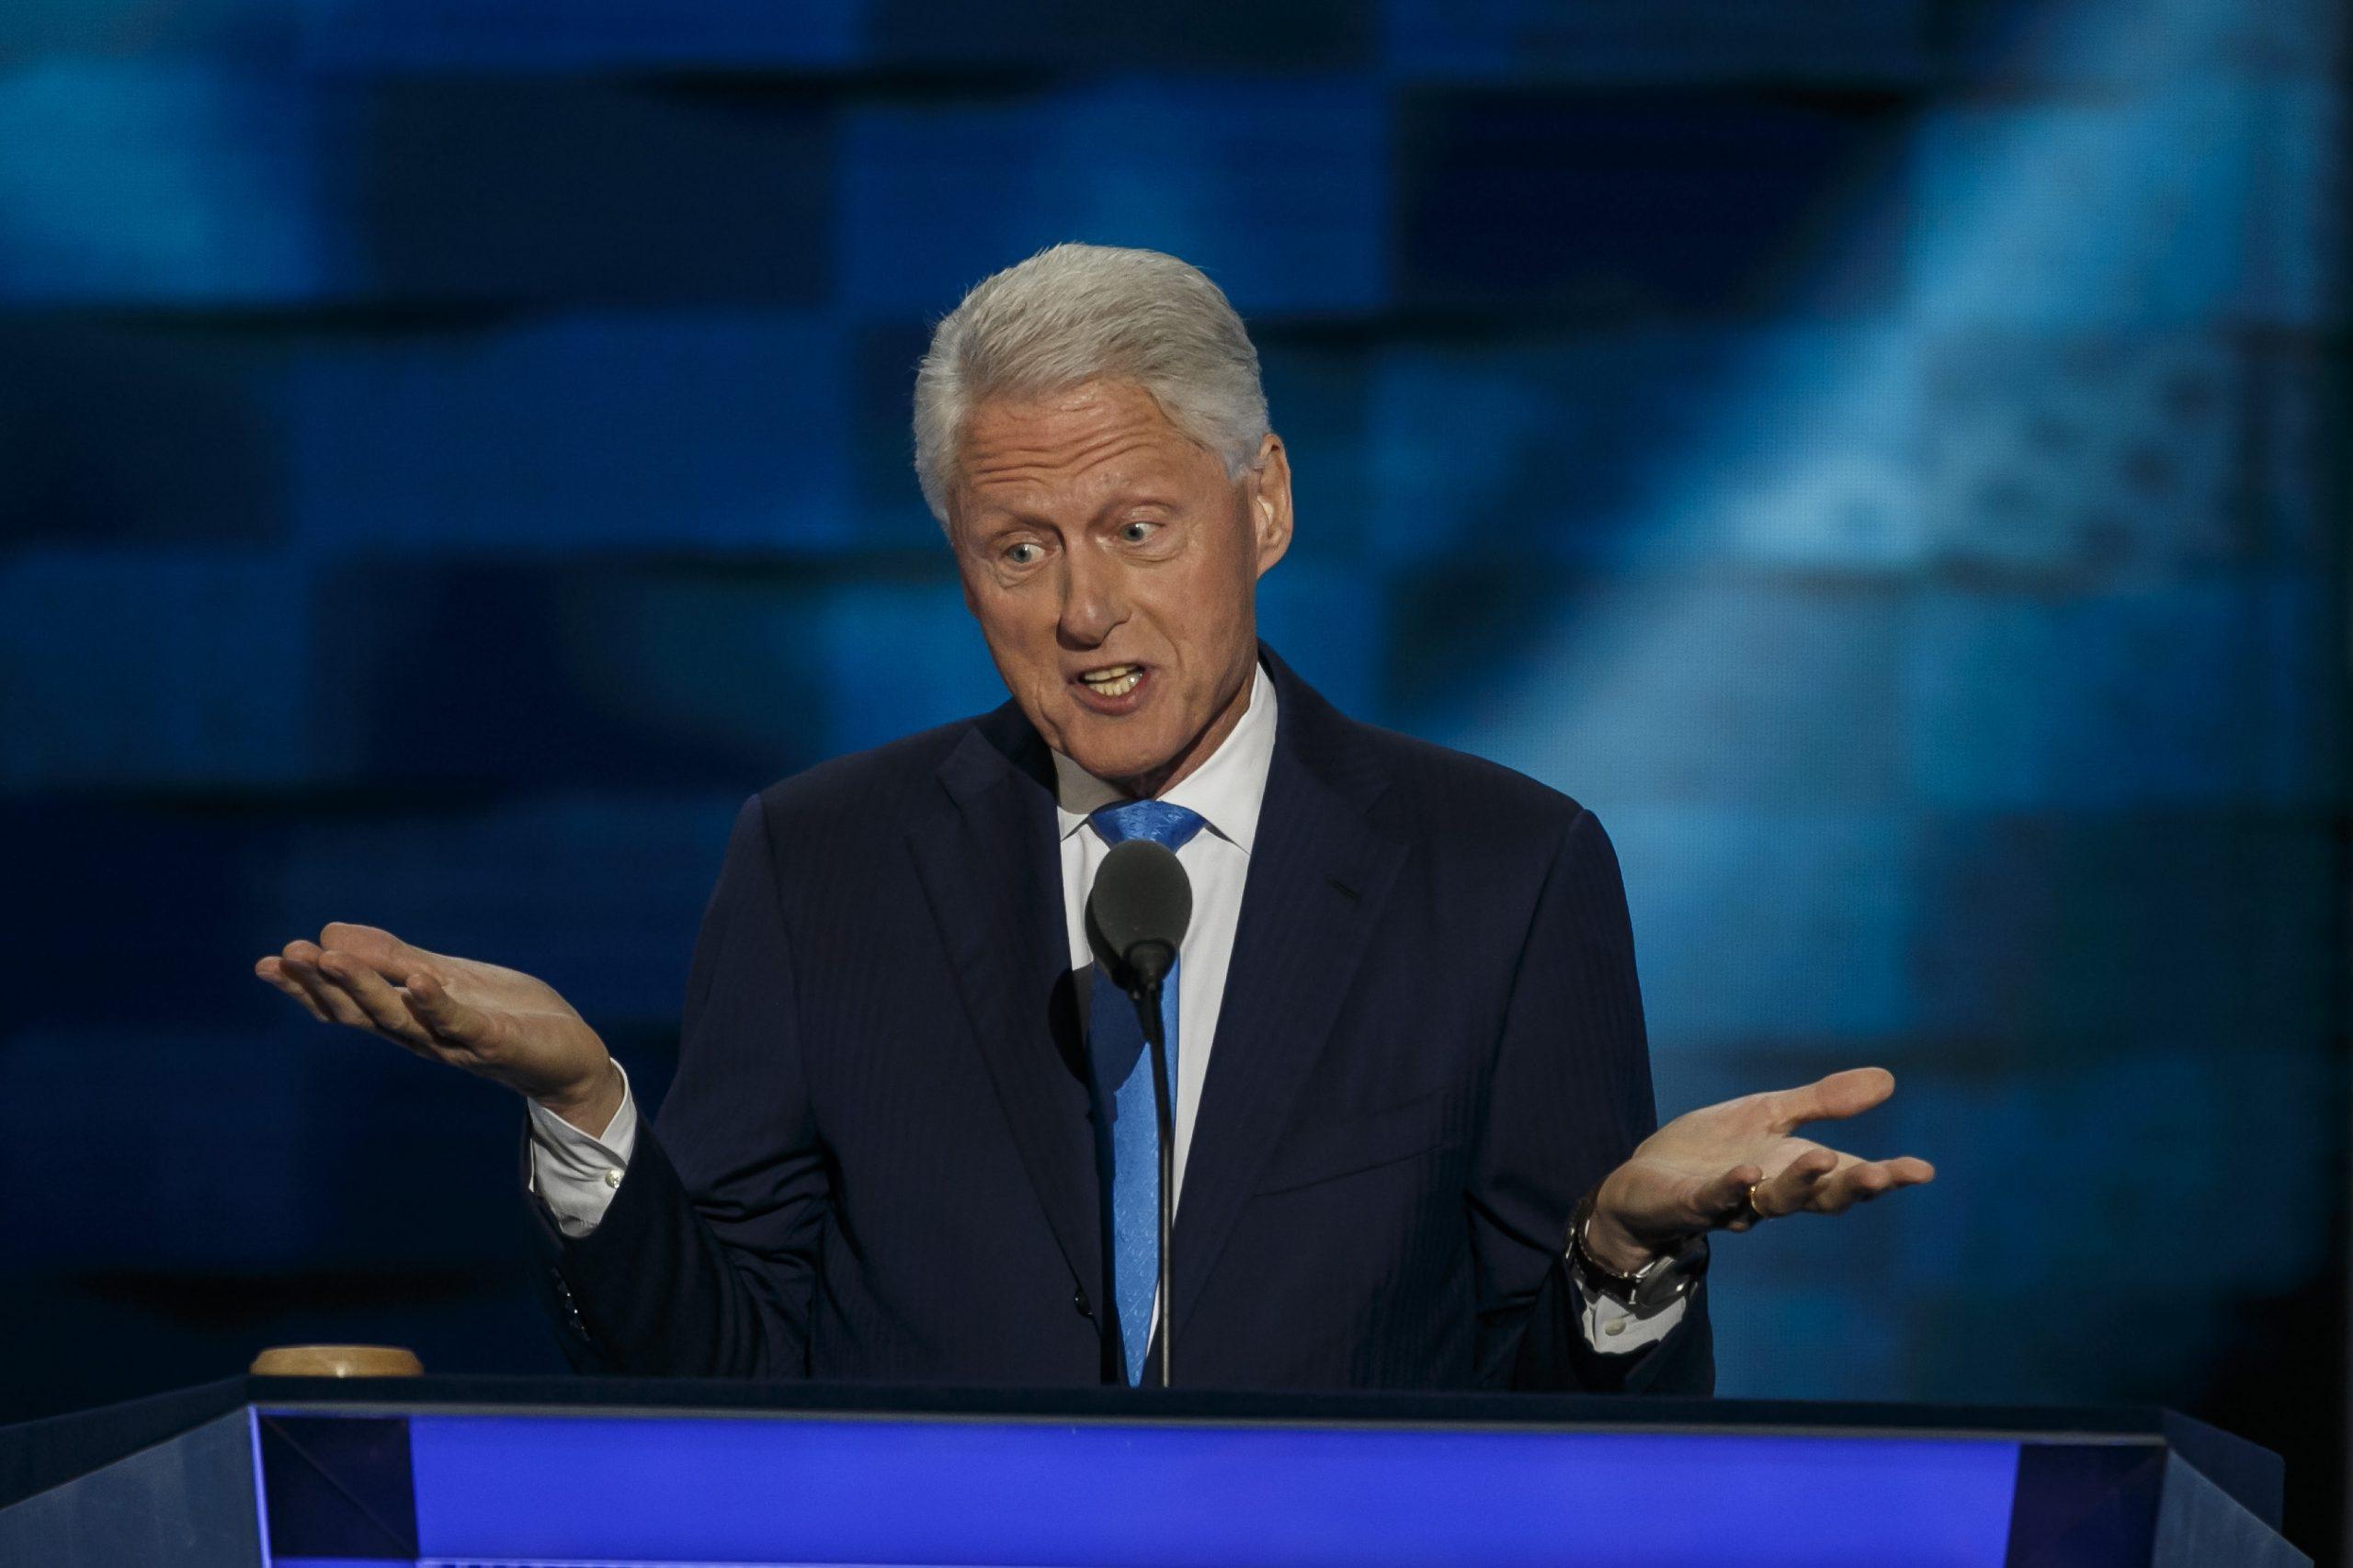 Former President Bill Clinton speaks at the Democratic National Convention in Philadelphia on July 26, 2016. A memo released by WikiLeaks on Wednesday, Oct. 26, 2016, indicates a former aide arranged for $50 million in payments for the former president, part of a complicated mingling of lucrative business deals and charity work of the Clinton Foundation. (Marcus Yam/Los Angeles Times/TNS)